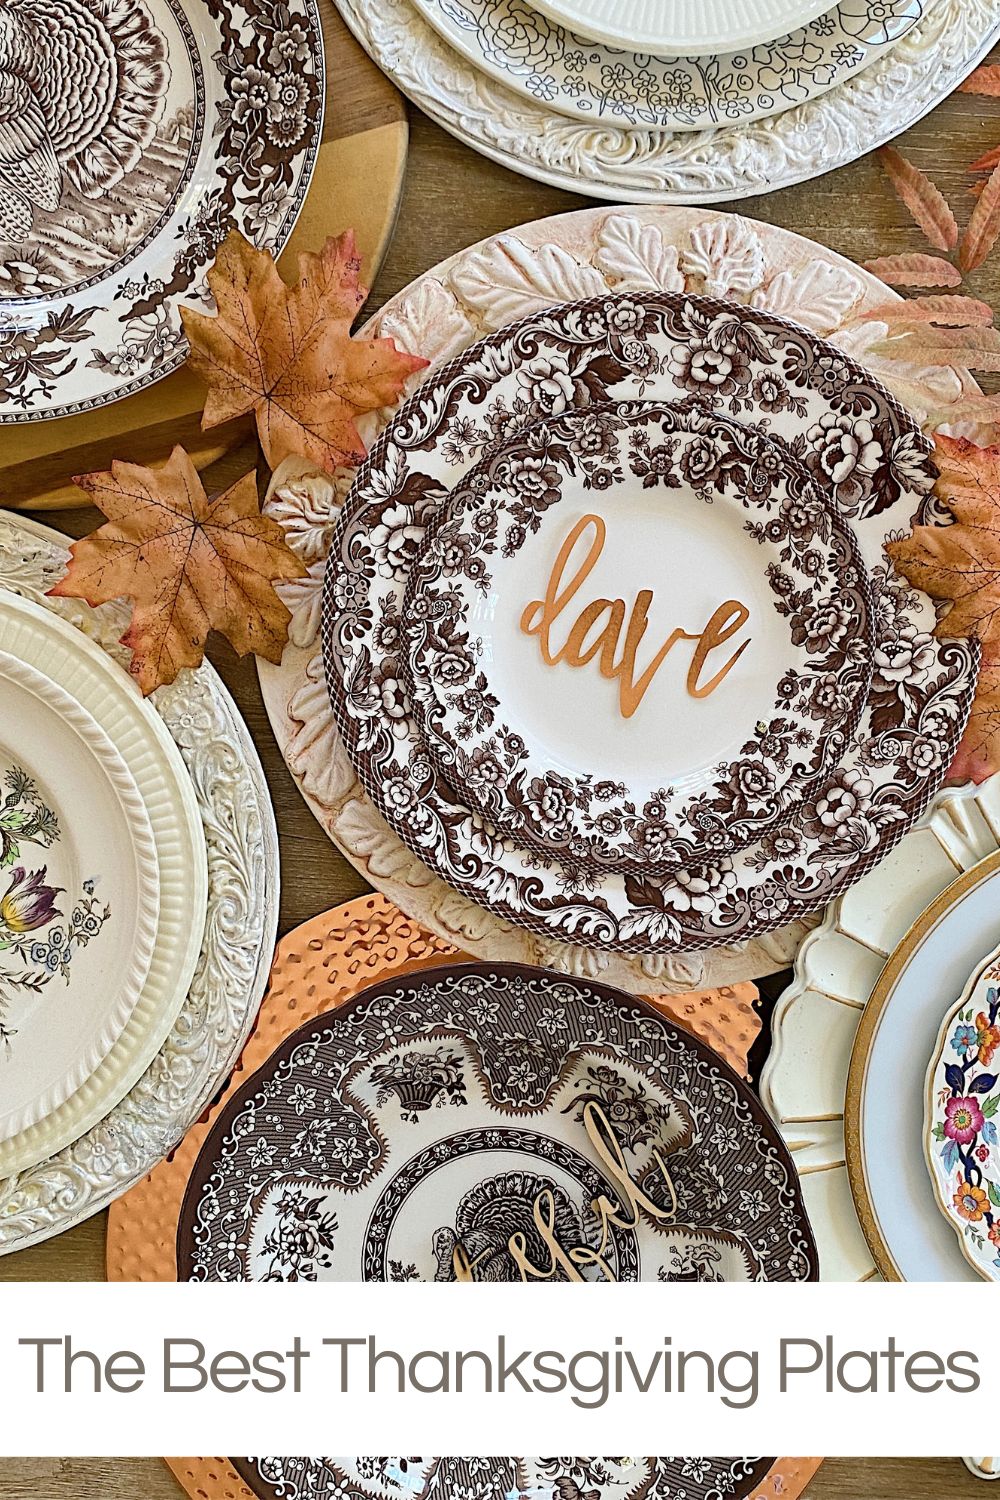 I went through our Butler's Pantry and found my favorite Thanksgiving plates. I have been collecting plates for years and I love these!